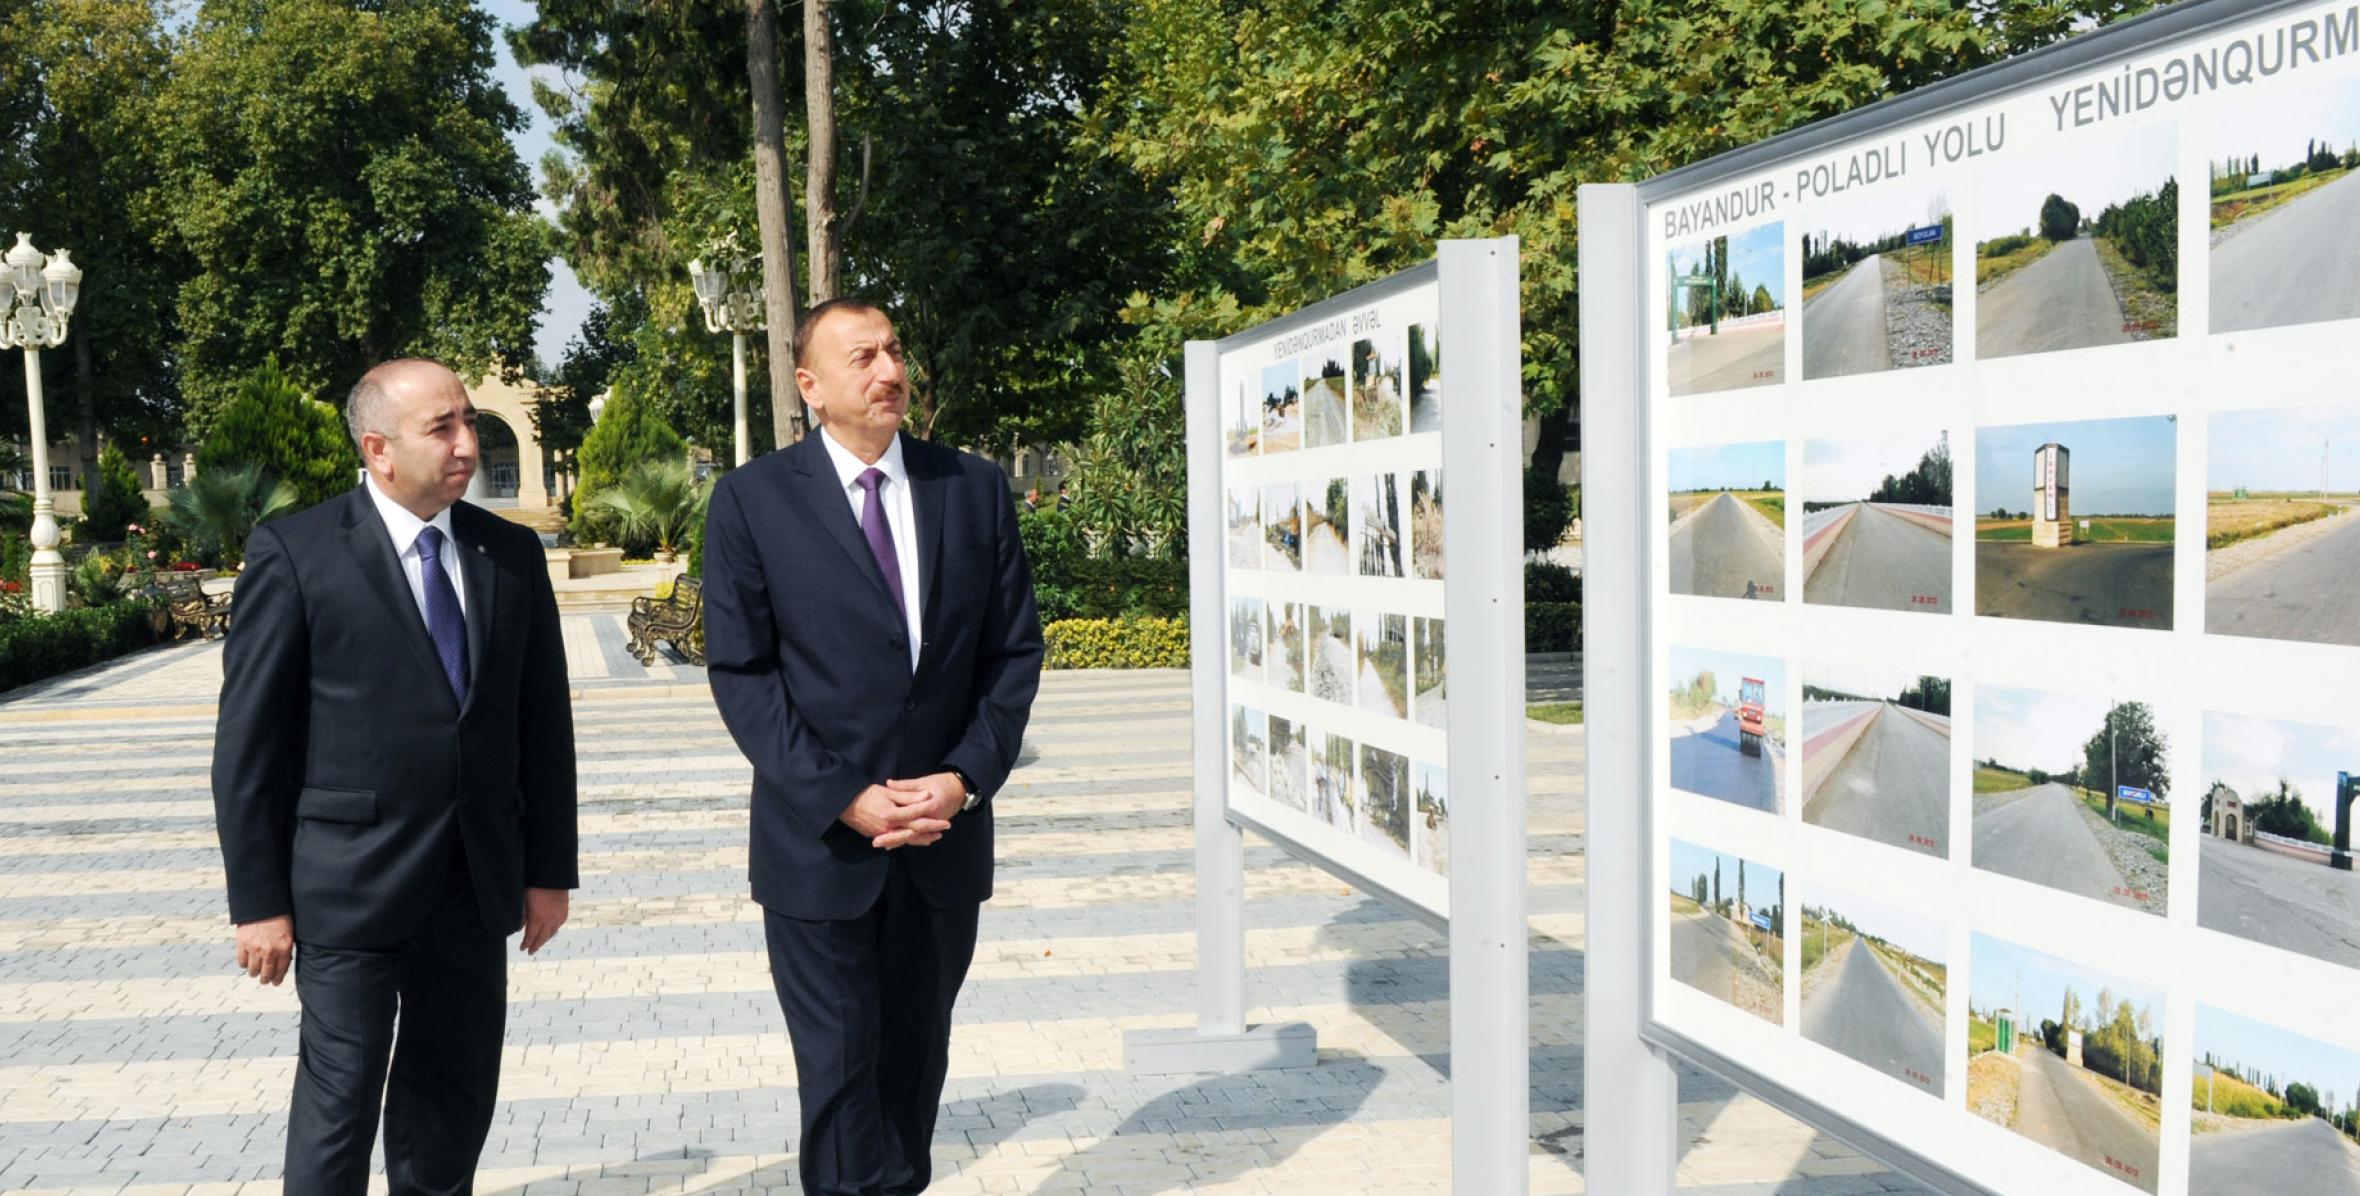 Ilham Aliyev attended the opening of the Heydar Park and the Heydar Aliyev Center in Tartar after reconstruction